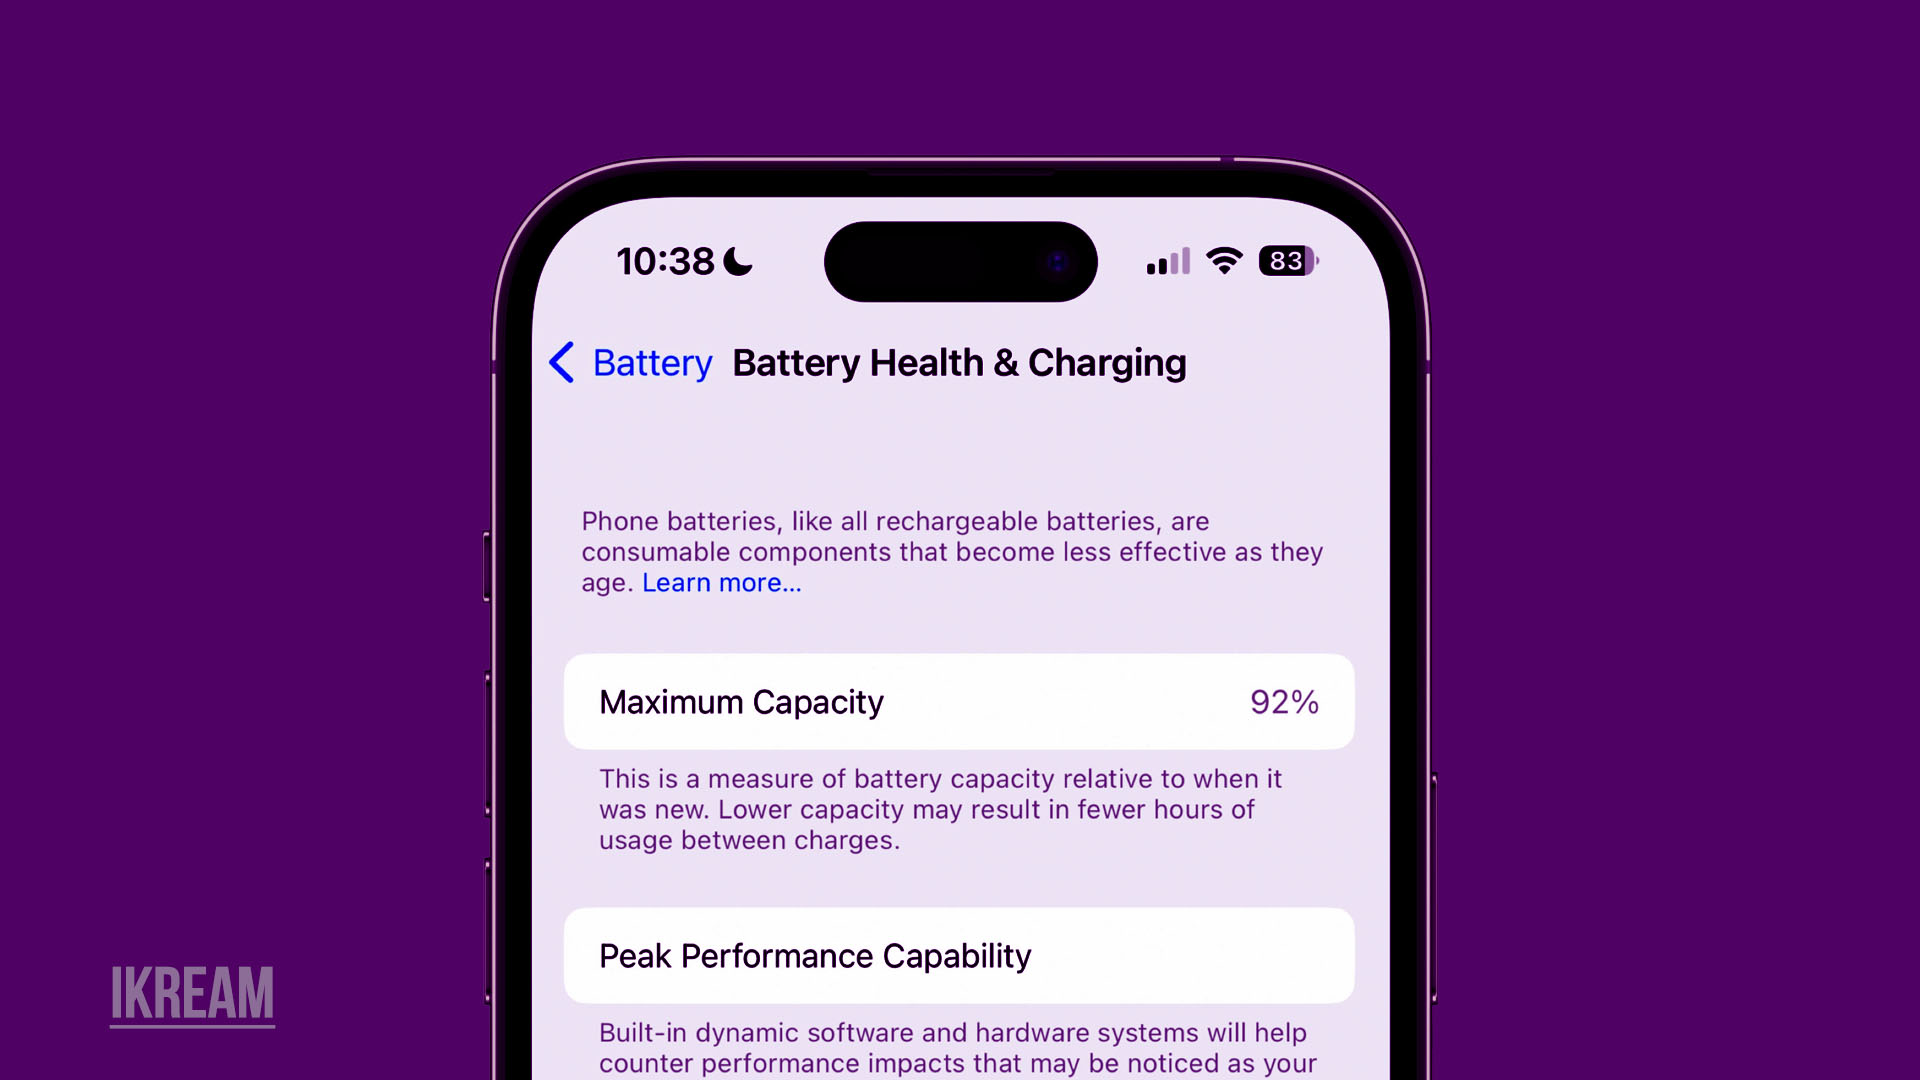 Battery health deteriorates as date of new iPhone approaches 